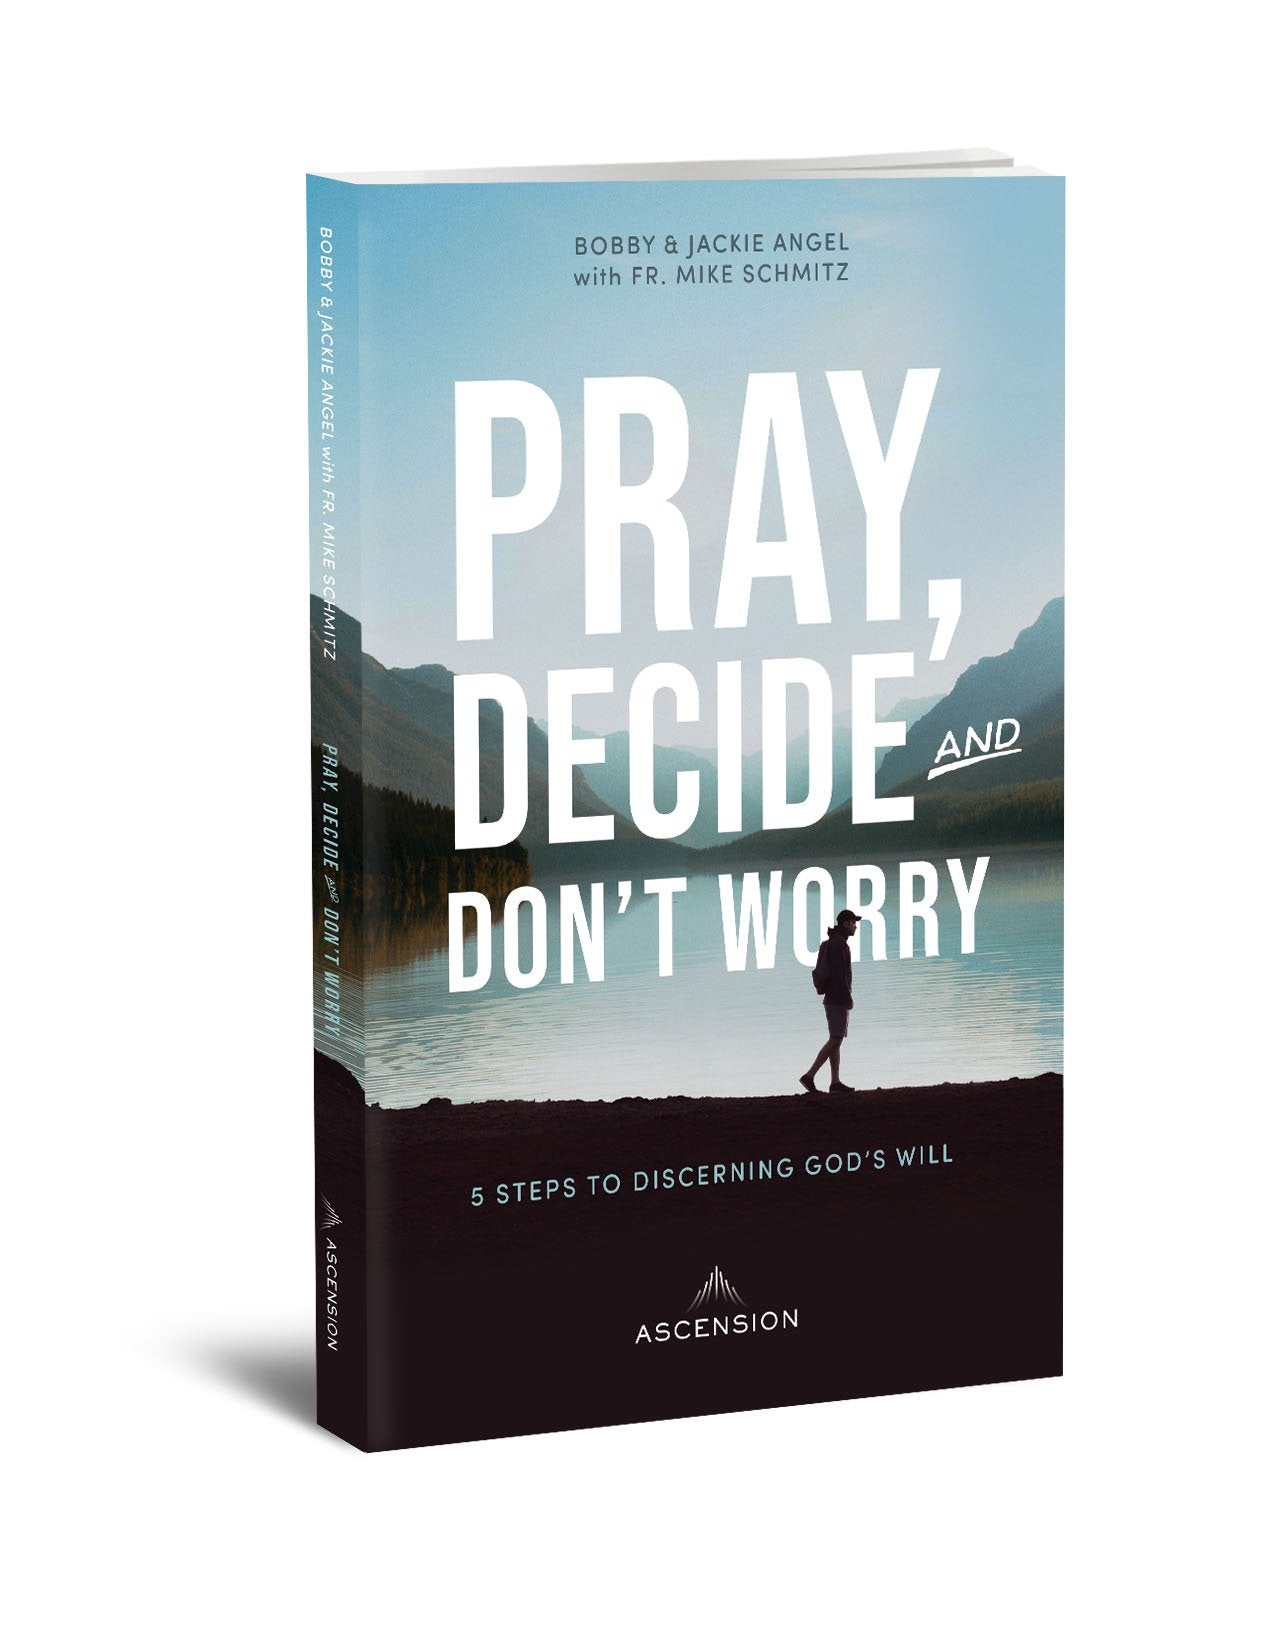 Pray, Decide, and Don’t Worry: Five Steps to Discerning God’s Will